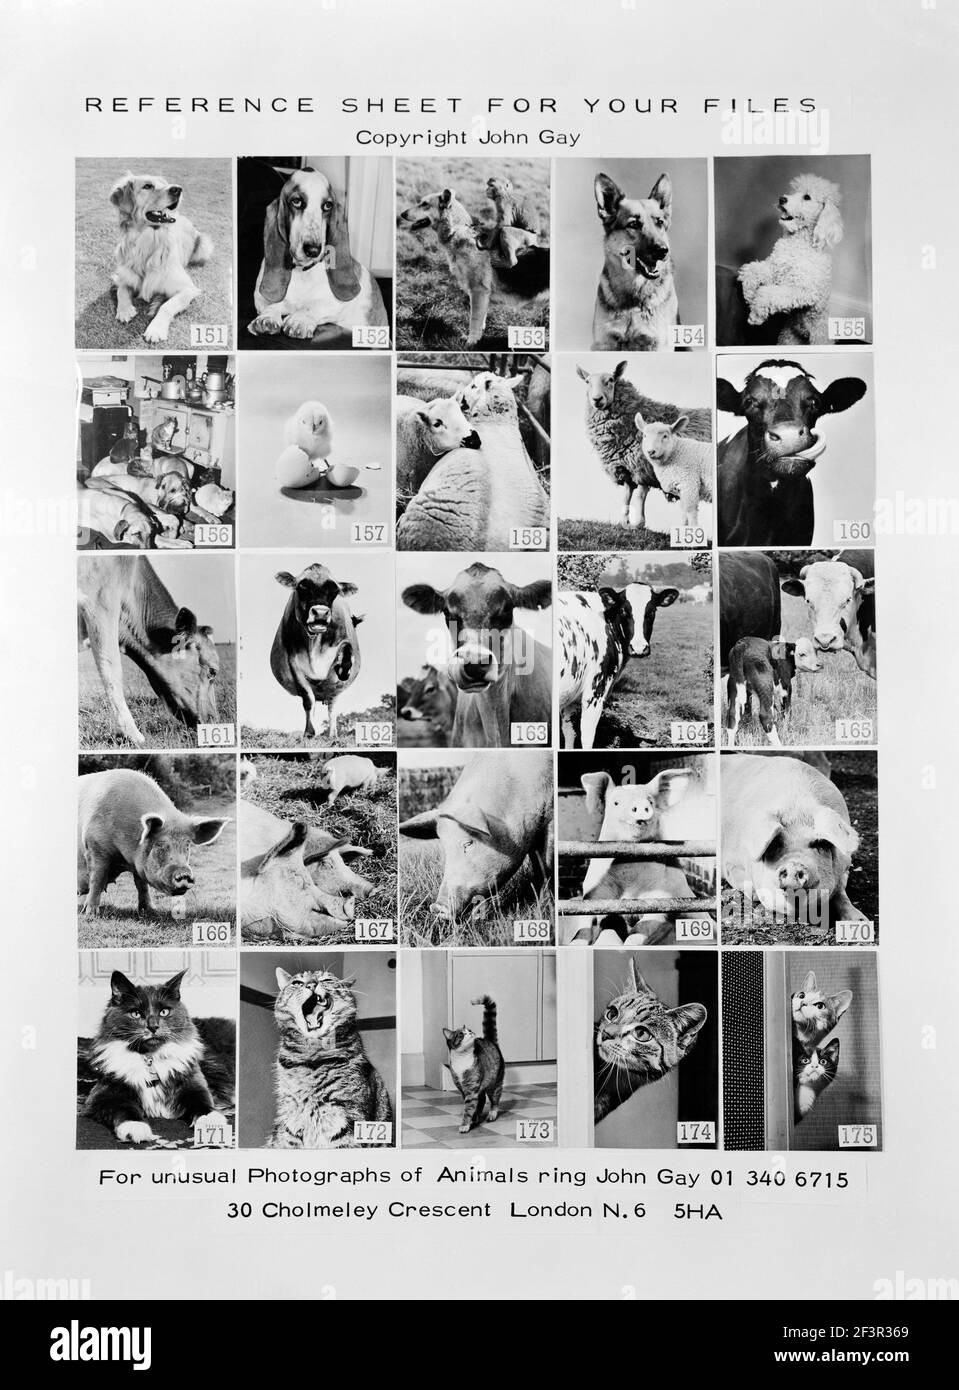 Photograph of promotional reference sheet of unusual photographs of animals taken by John Gay. November 1970. cow, cattle, calf, lamb, chick, pig Stock Photo